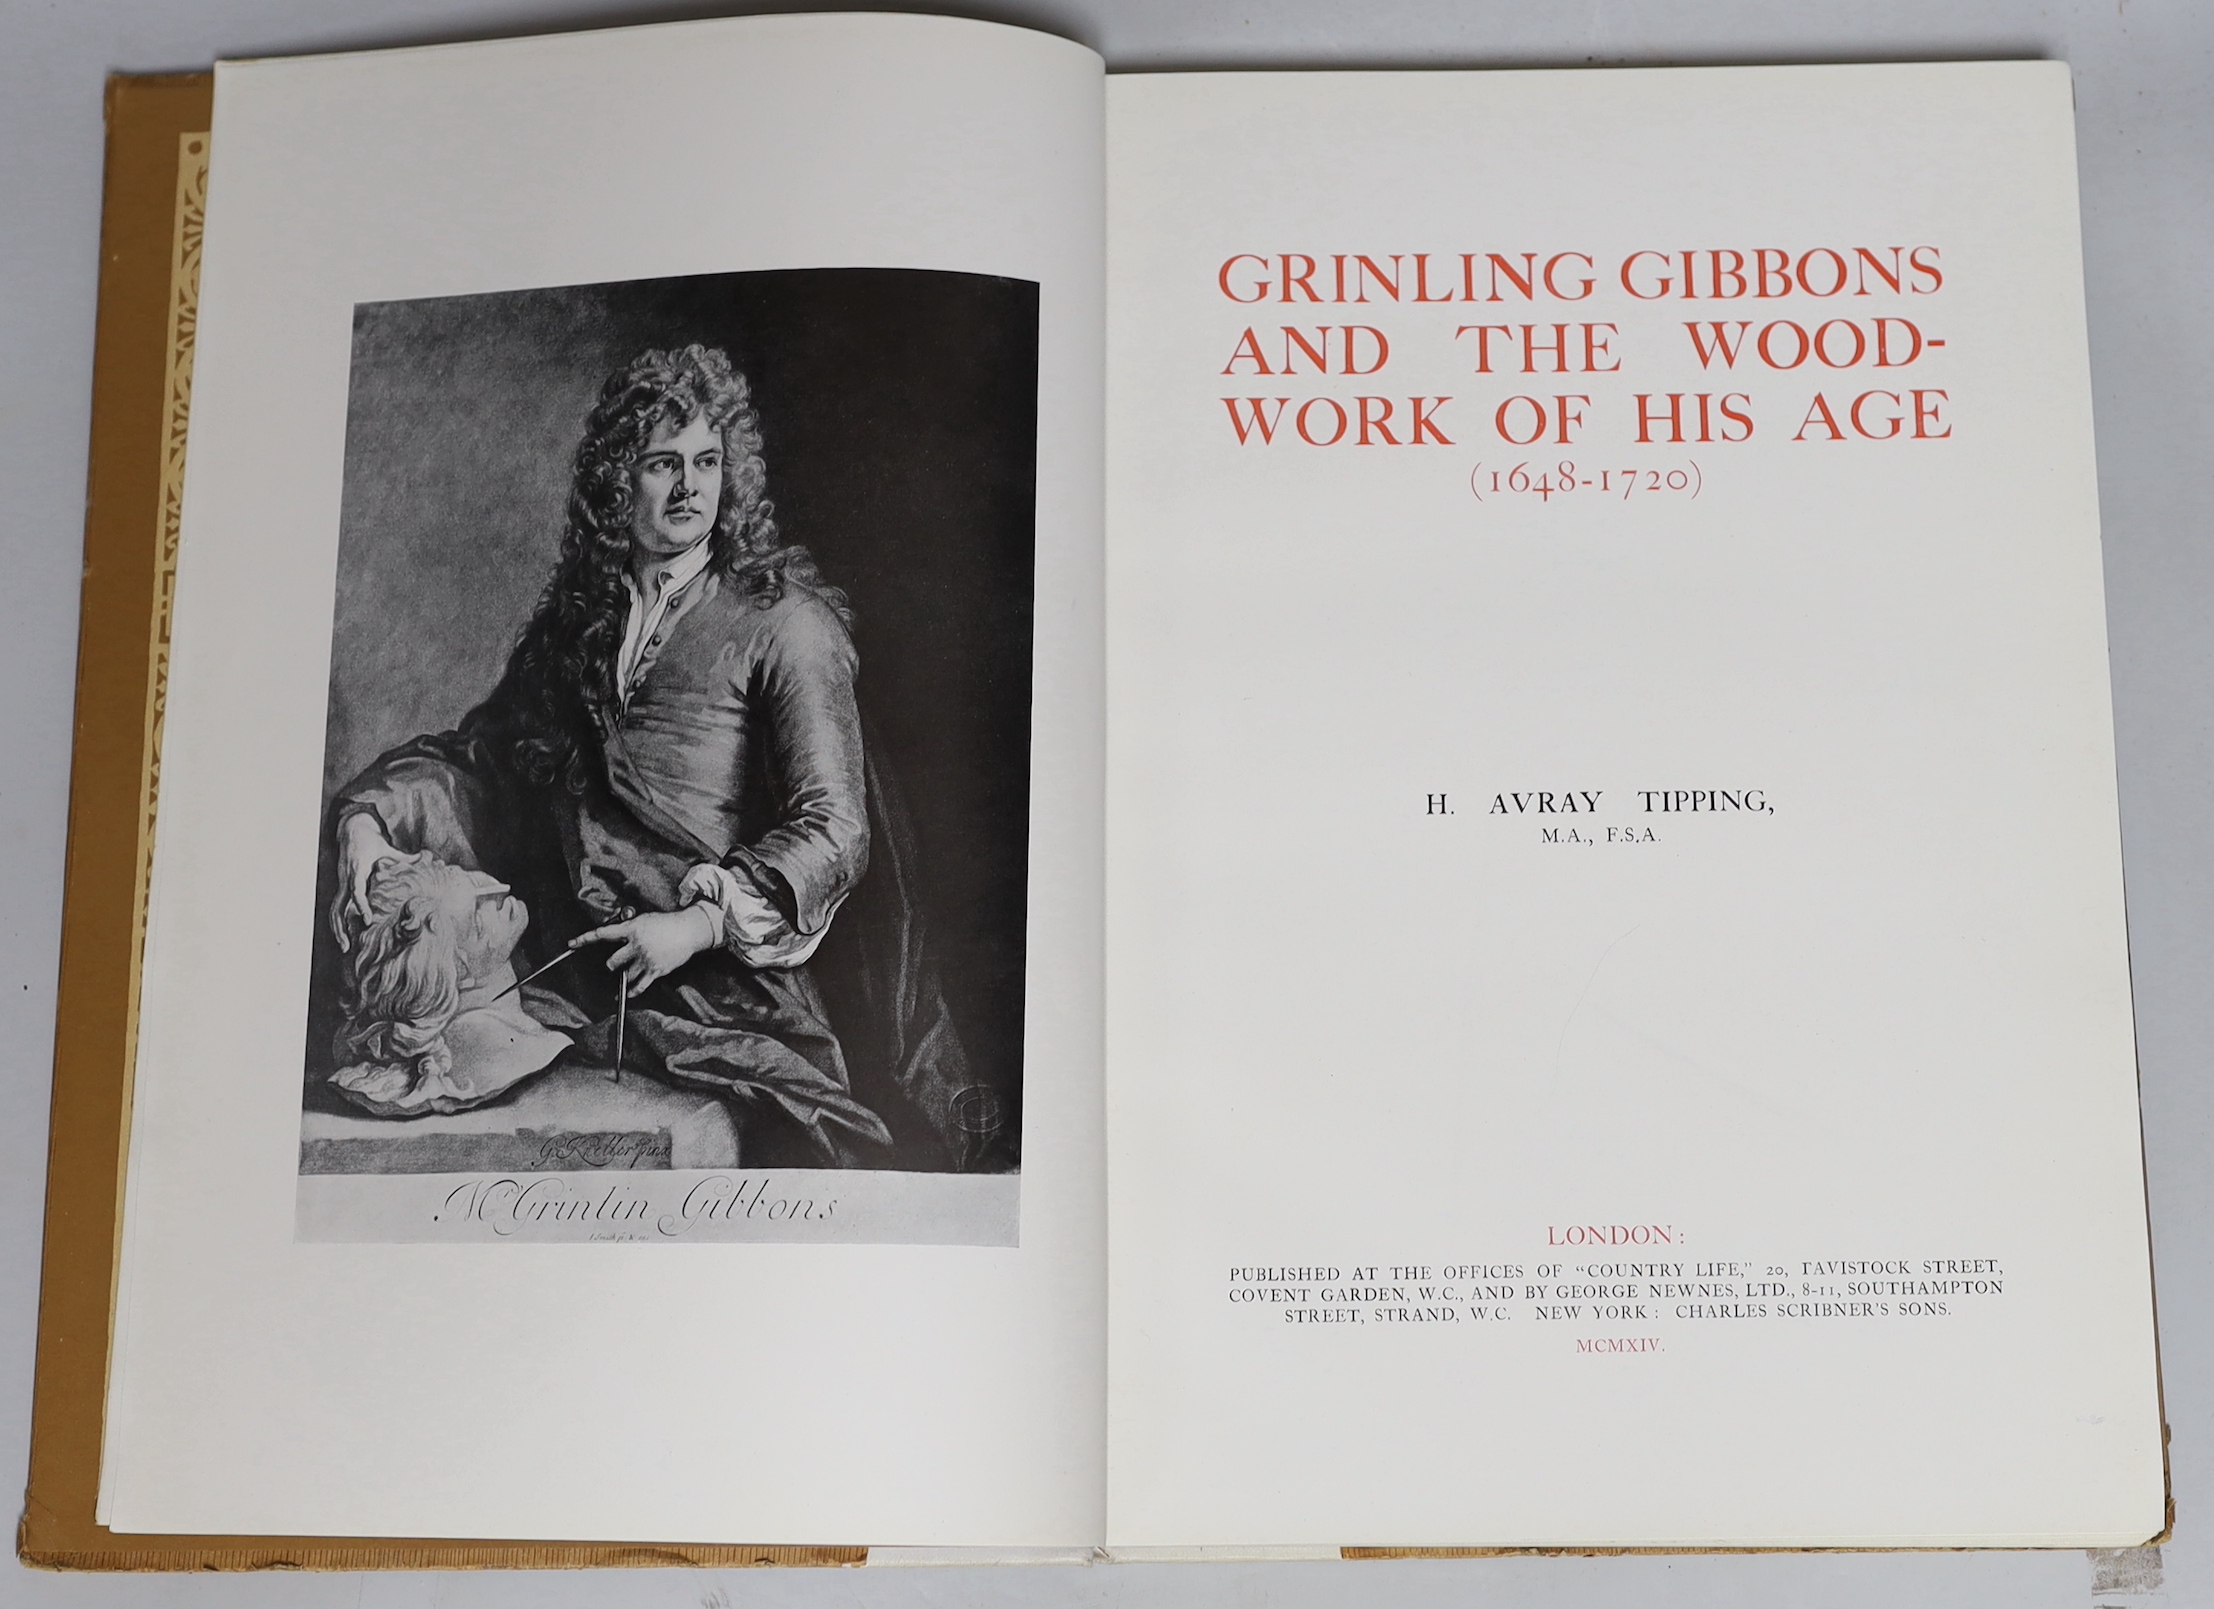 Jekyll, G and Hussey, C - Garden Ornament, second edition, original cloth, 1927 and Tipping, H.A – Grinling Gibbons, original cloth-backed boards, 1914, (2)